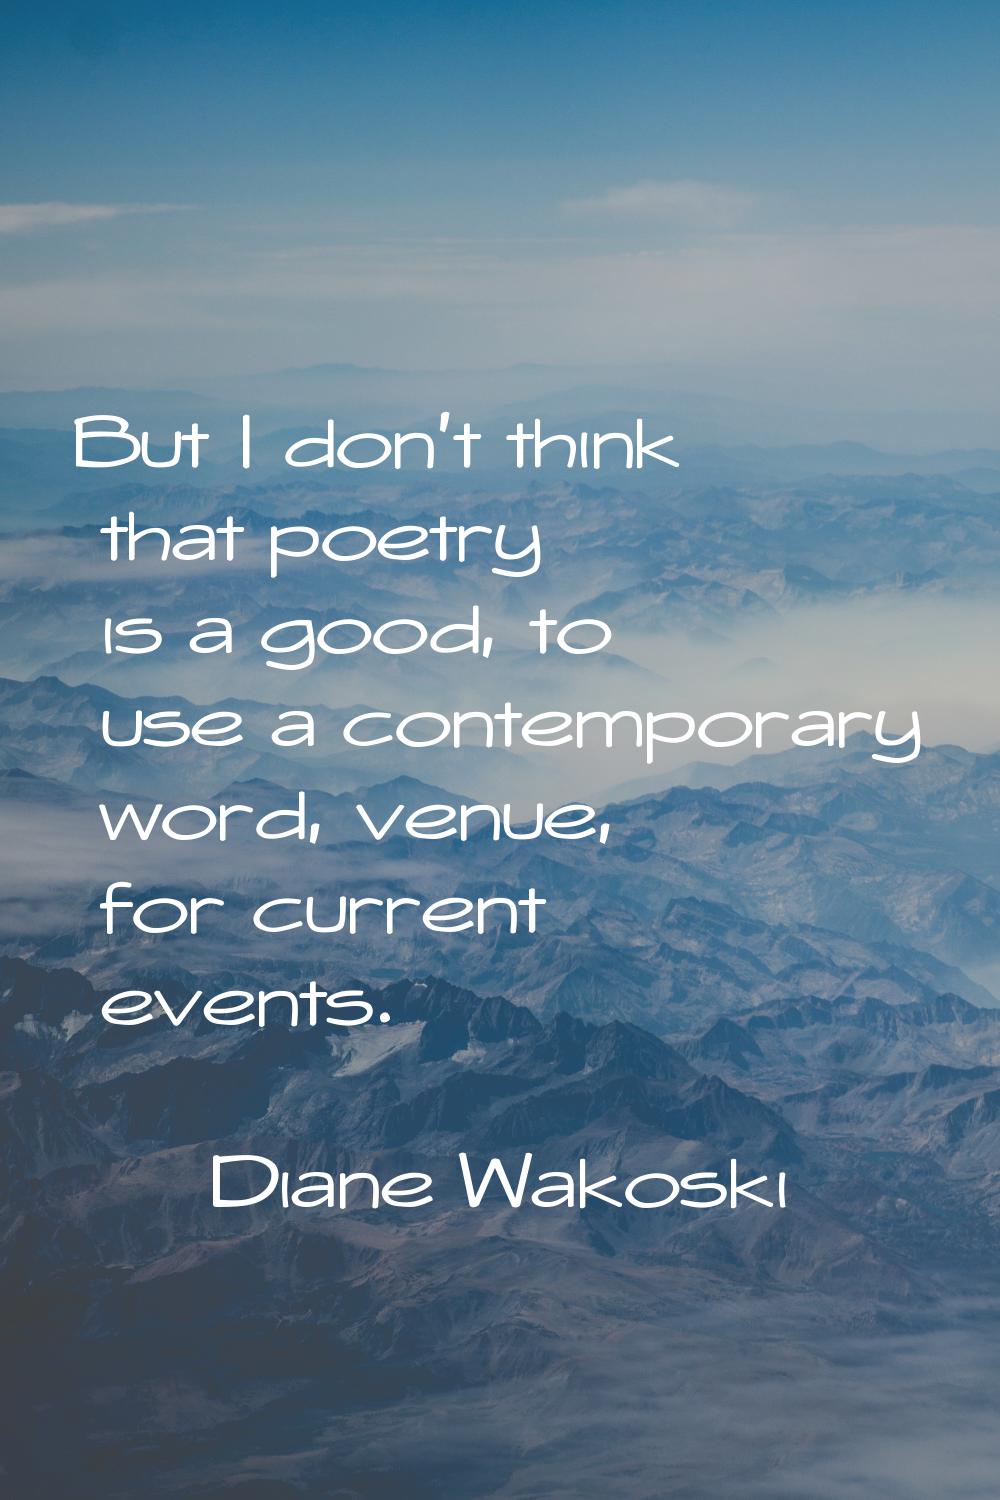 But I don't think that poetry is a good, to use a contemporary word, venue, for current events.